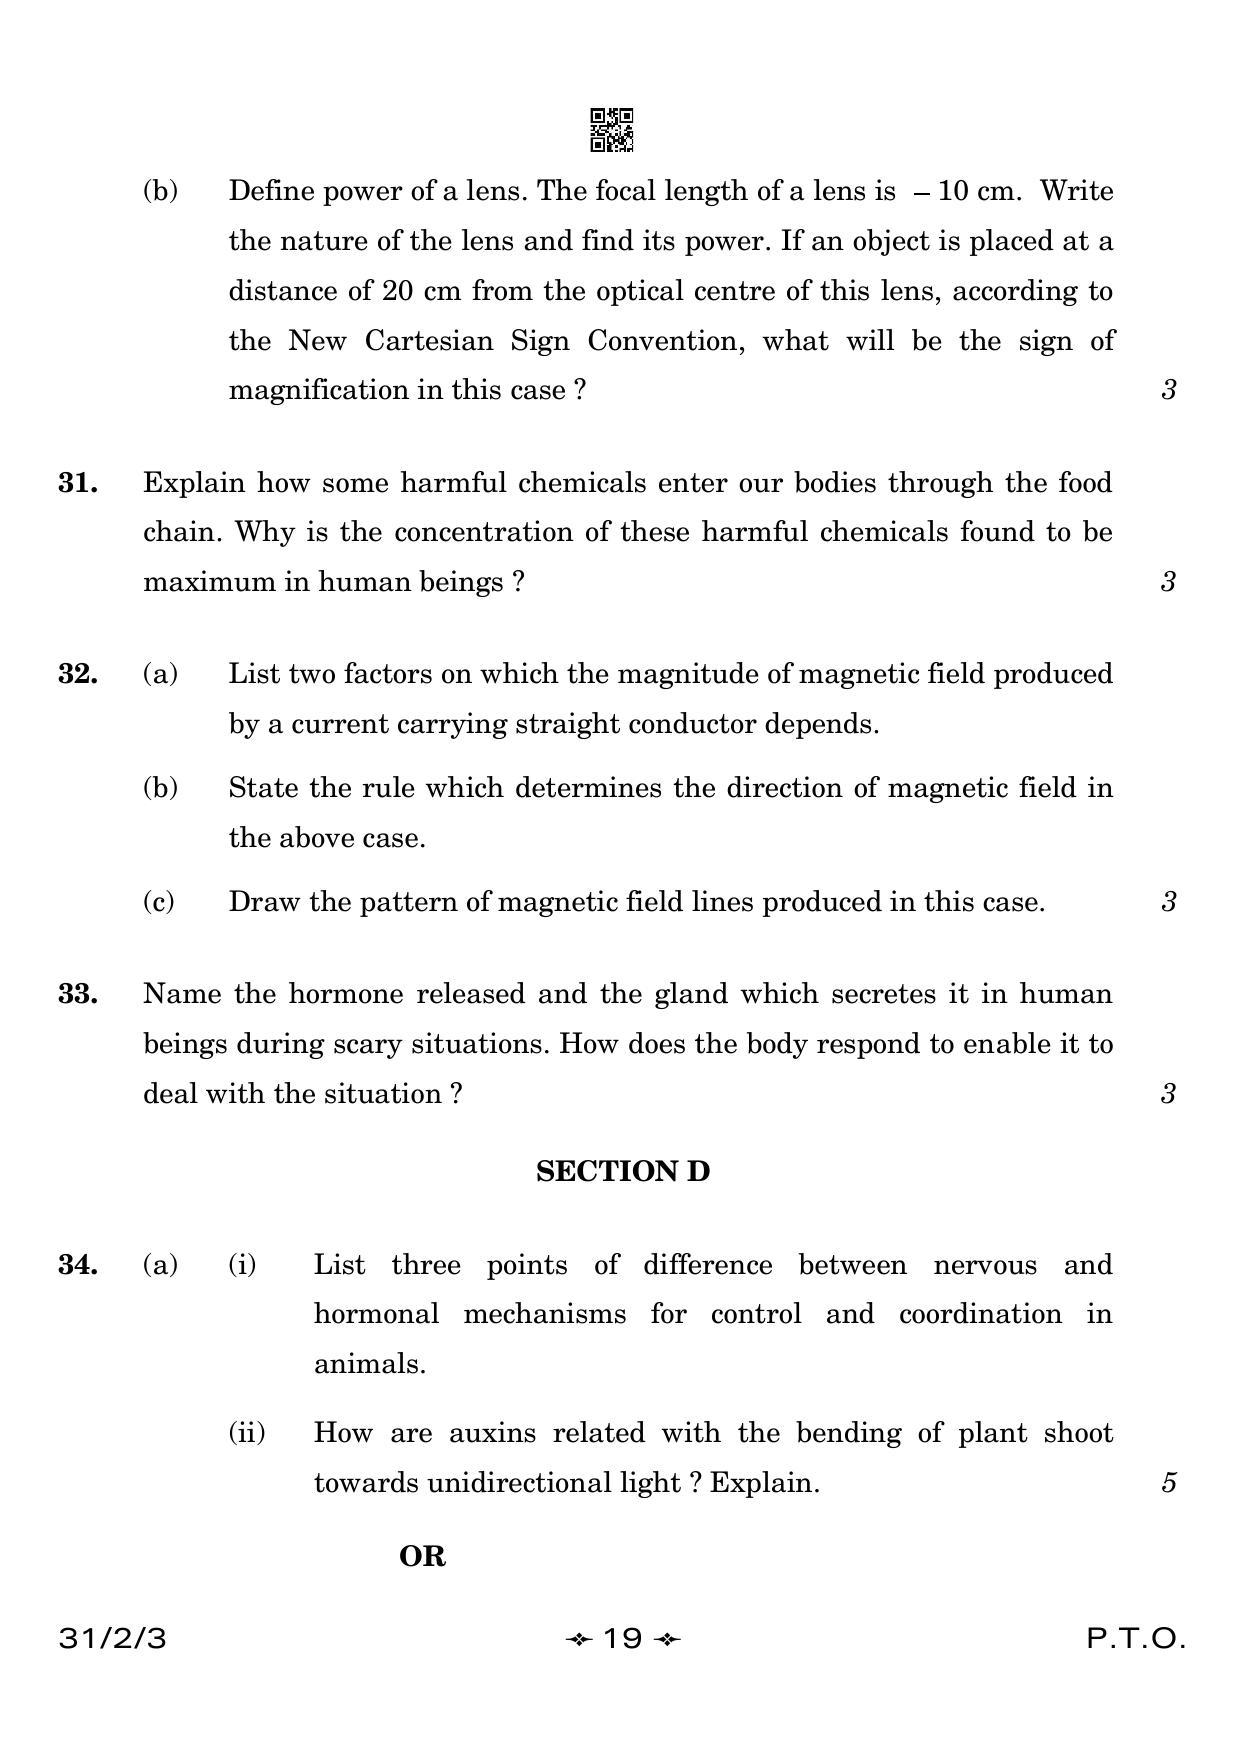 CBSE Class 10 31-2-3 Science 2023 Question Paper - Page 19